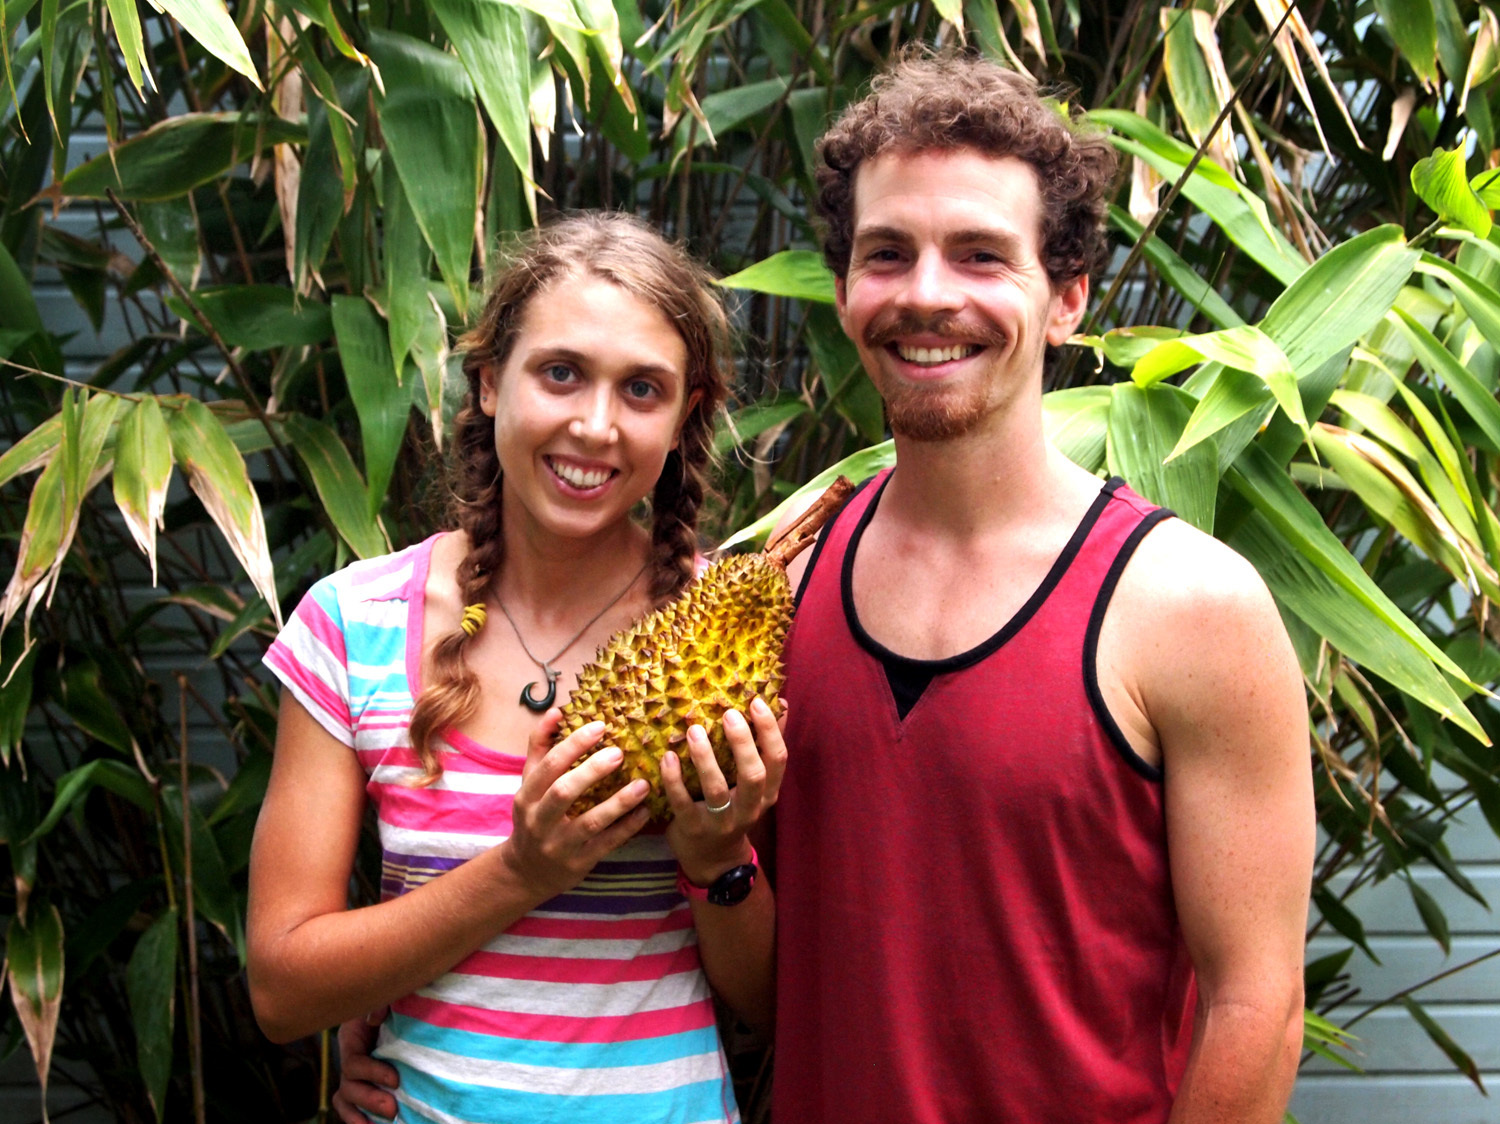 Lindsay Gasik and Rob Culclasure moved to Asia in 2012 to pursue durians. Photo: Courtesy of Lindsay Gasik